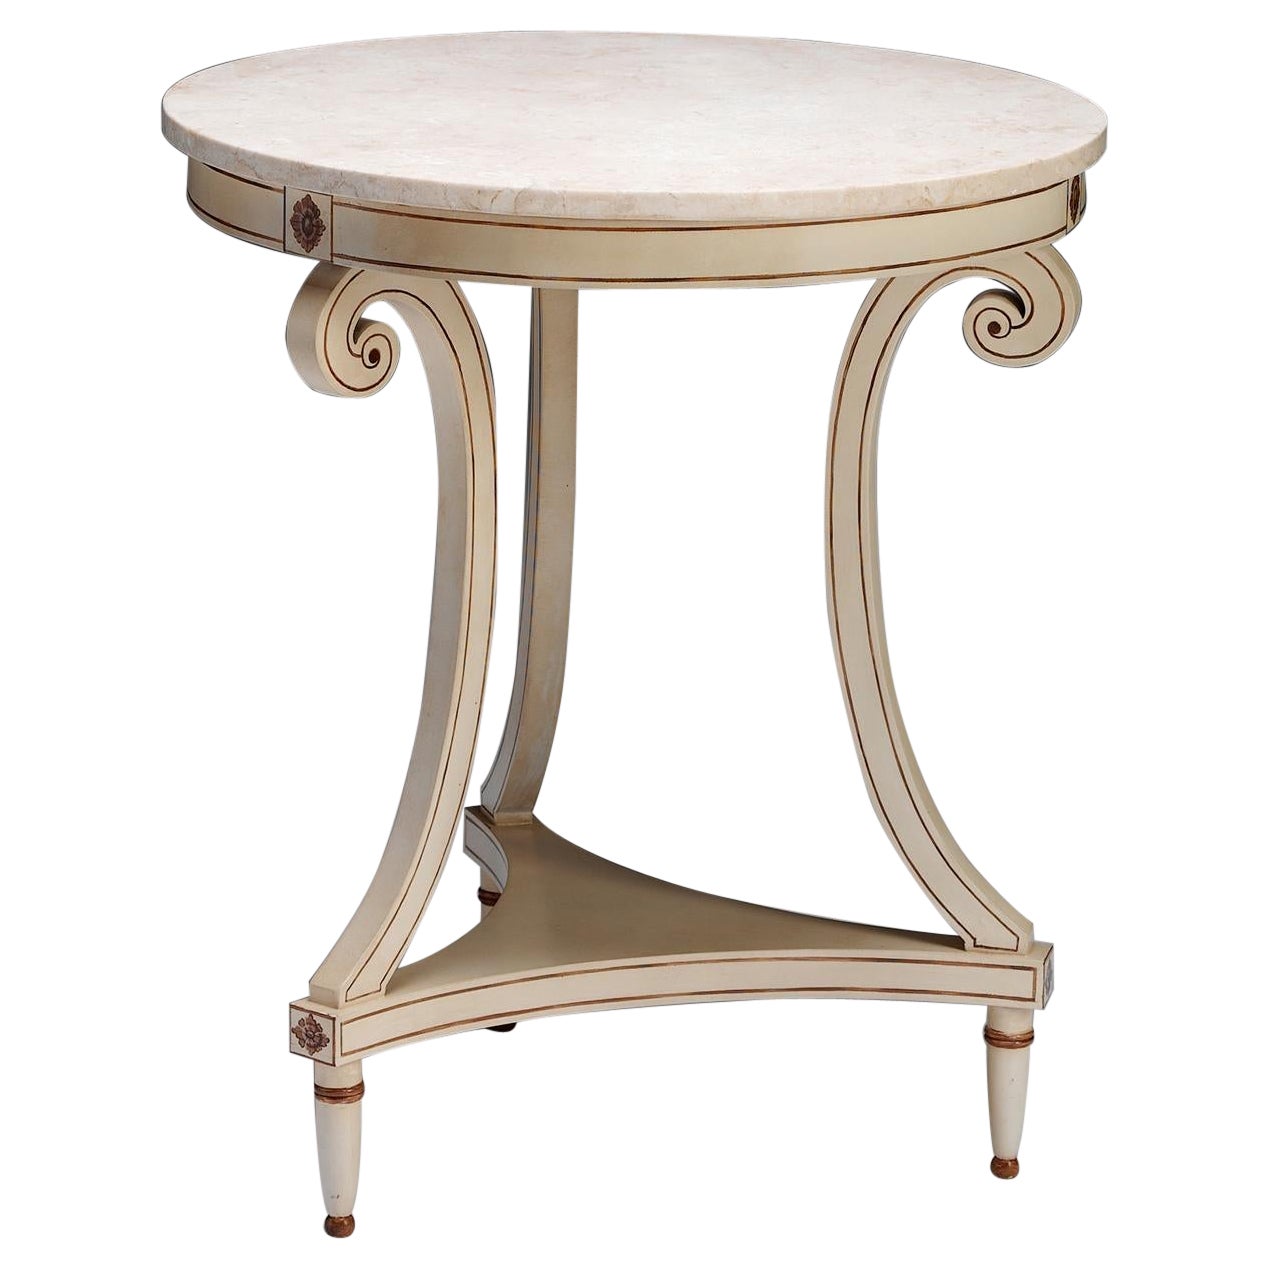 Painted Empire Table For Sale